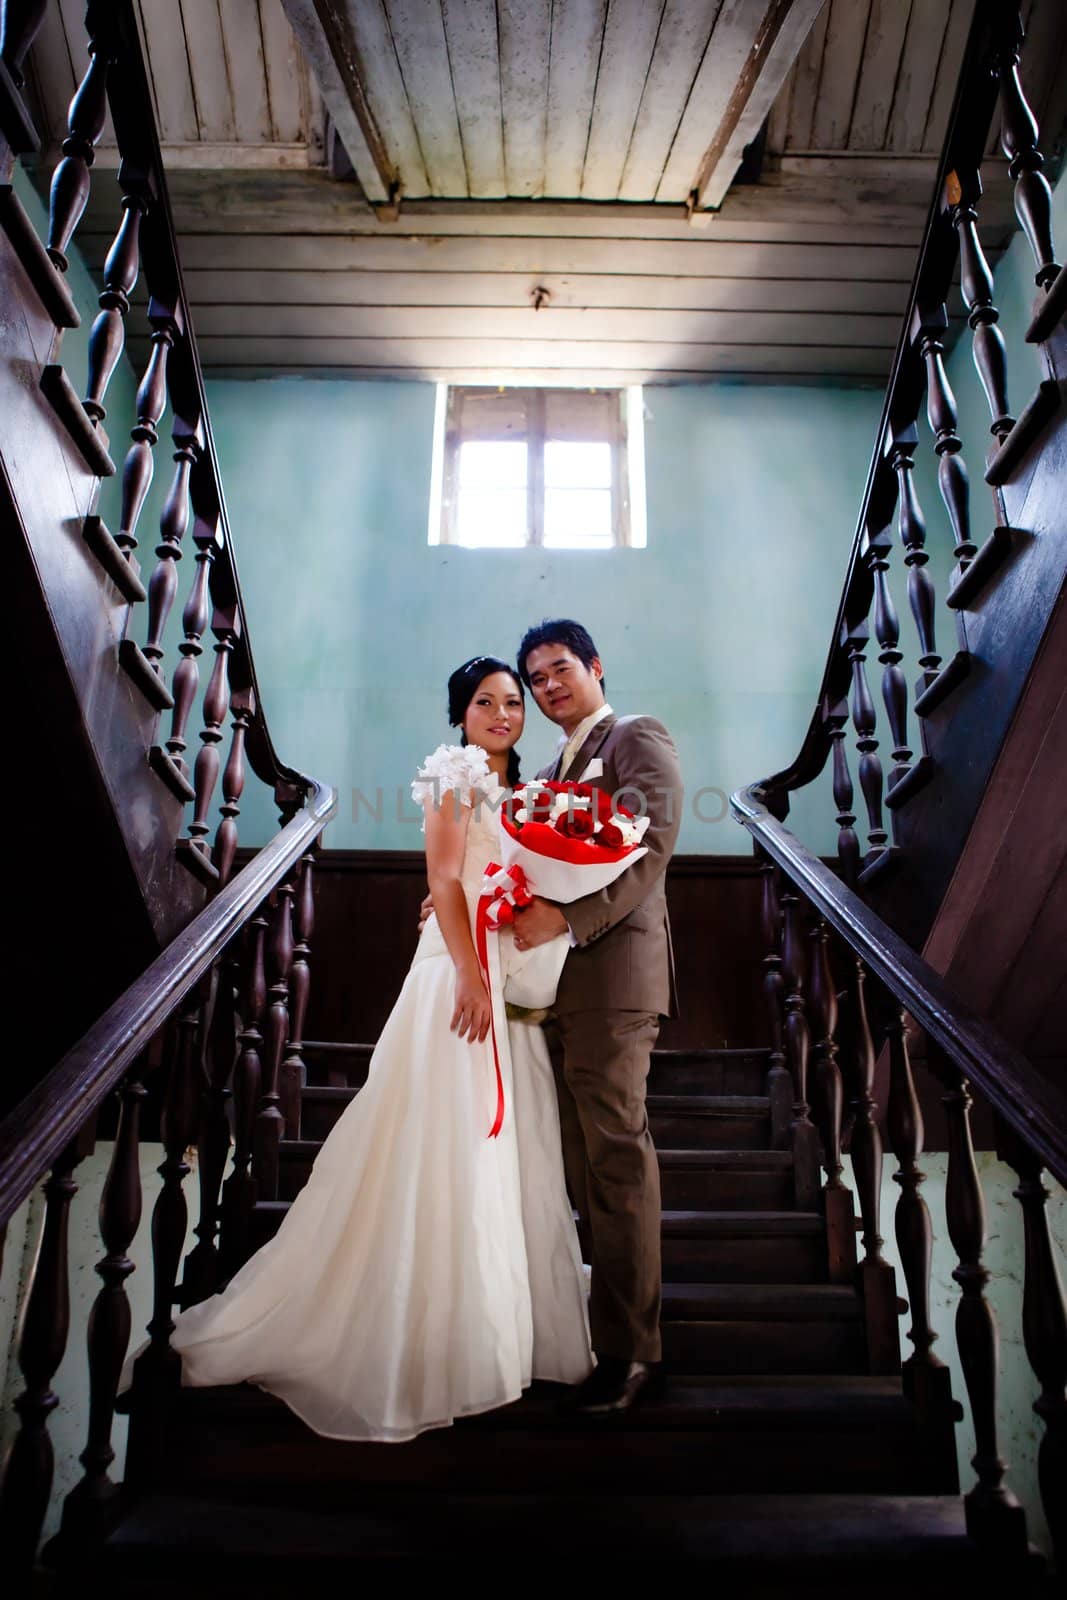 Bride and groom standing at ladder indoor of old building